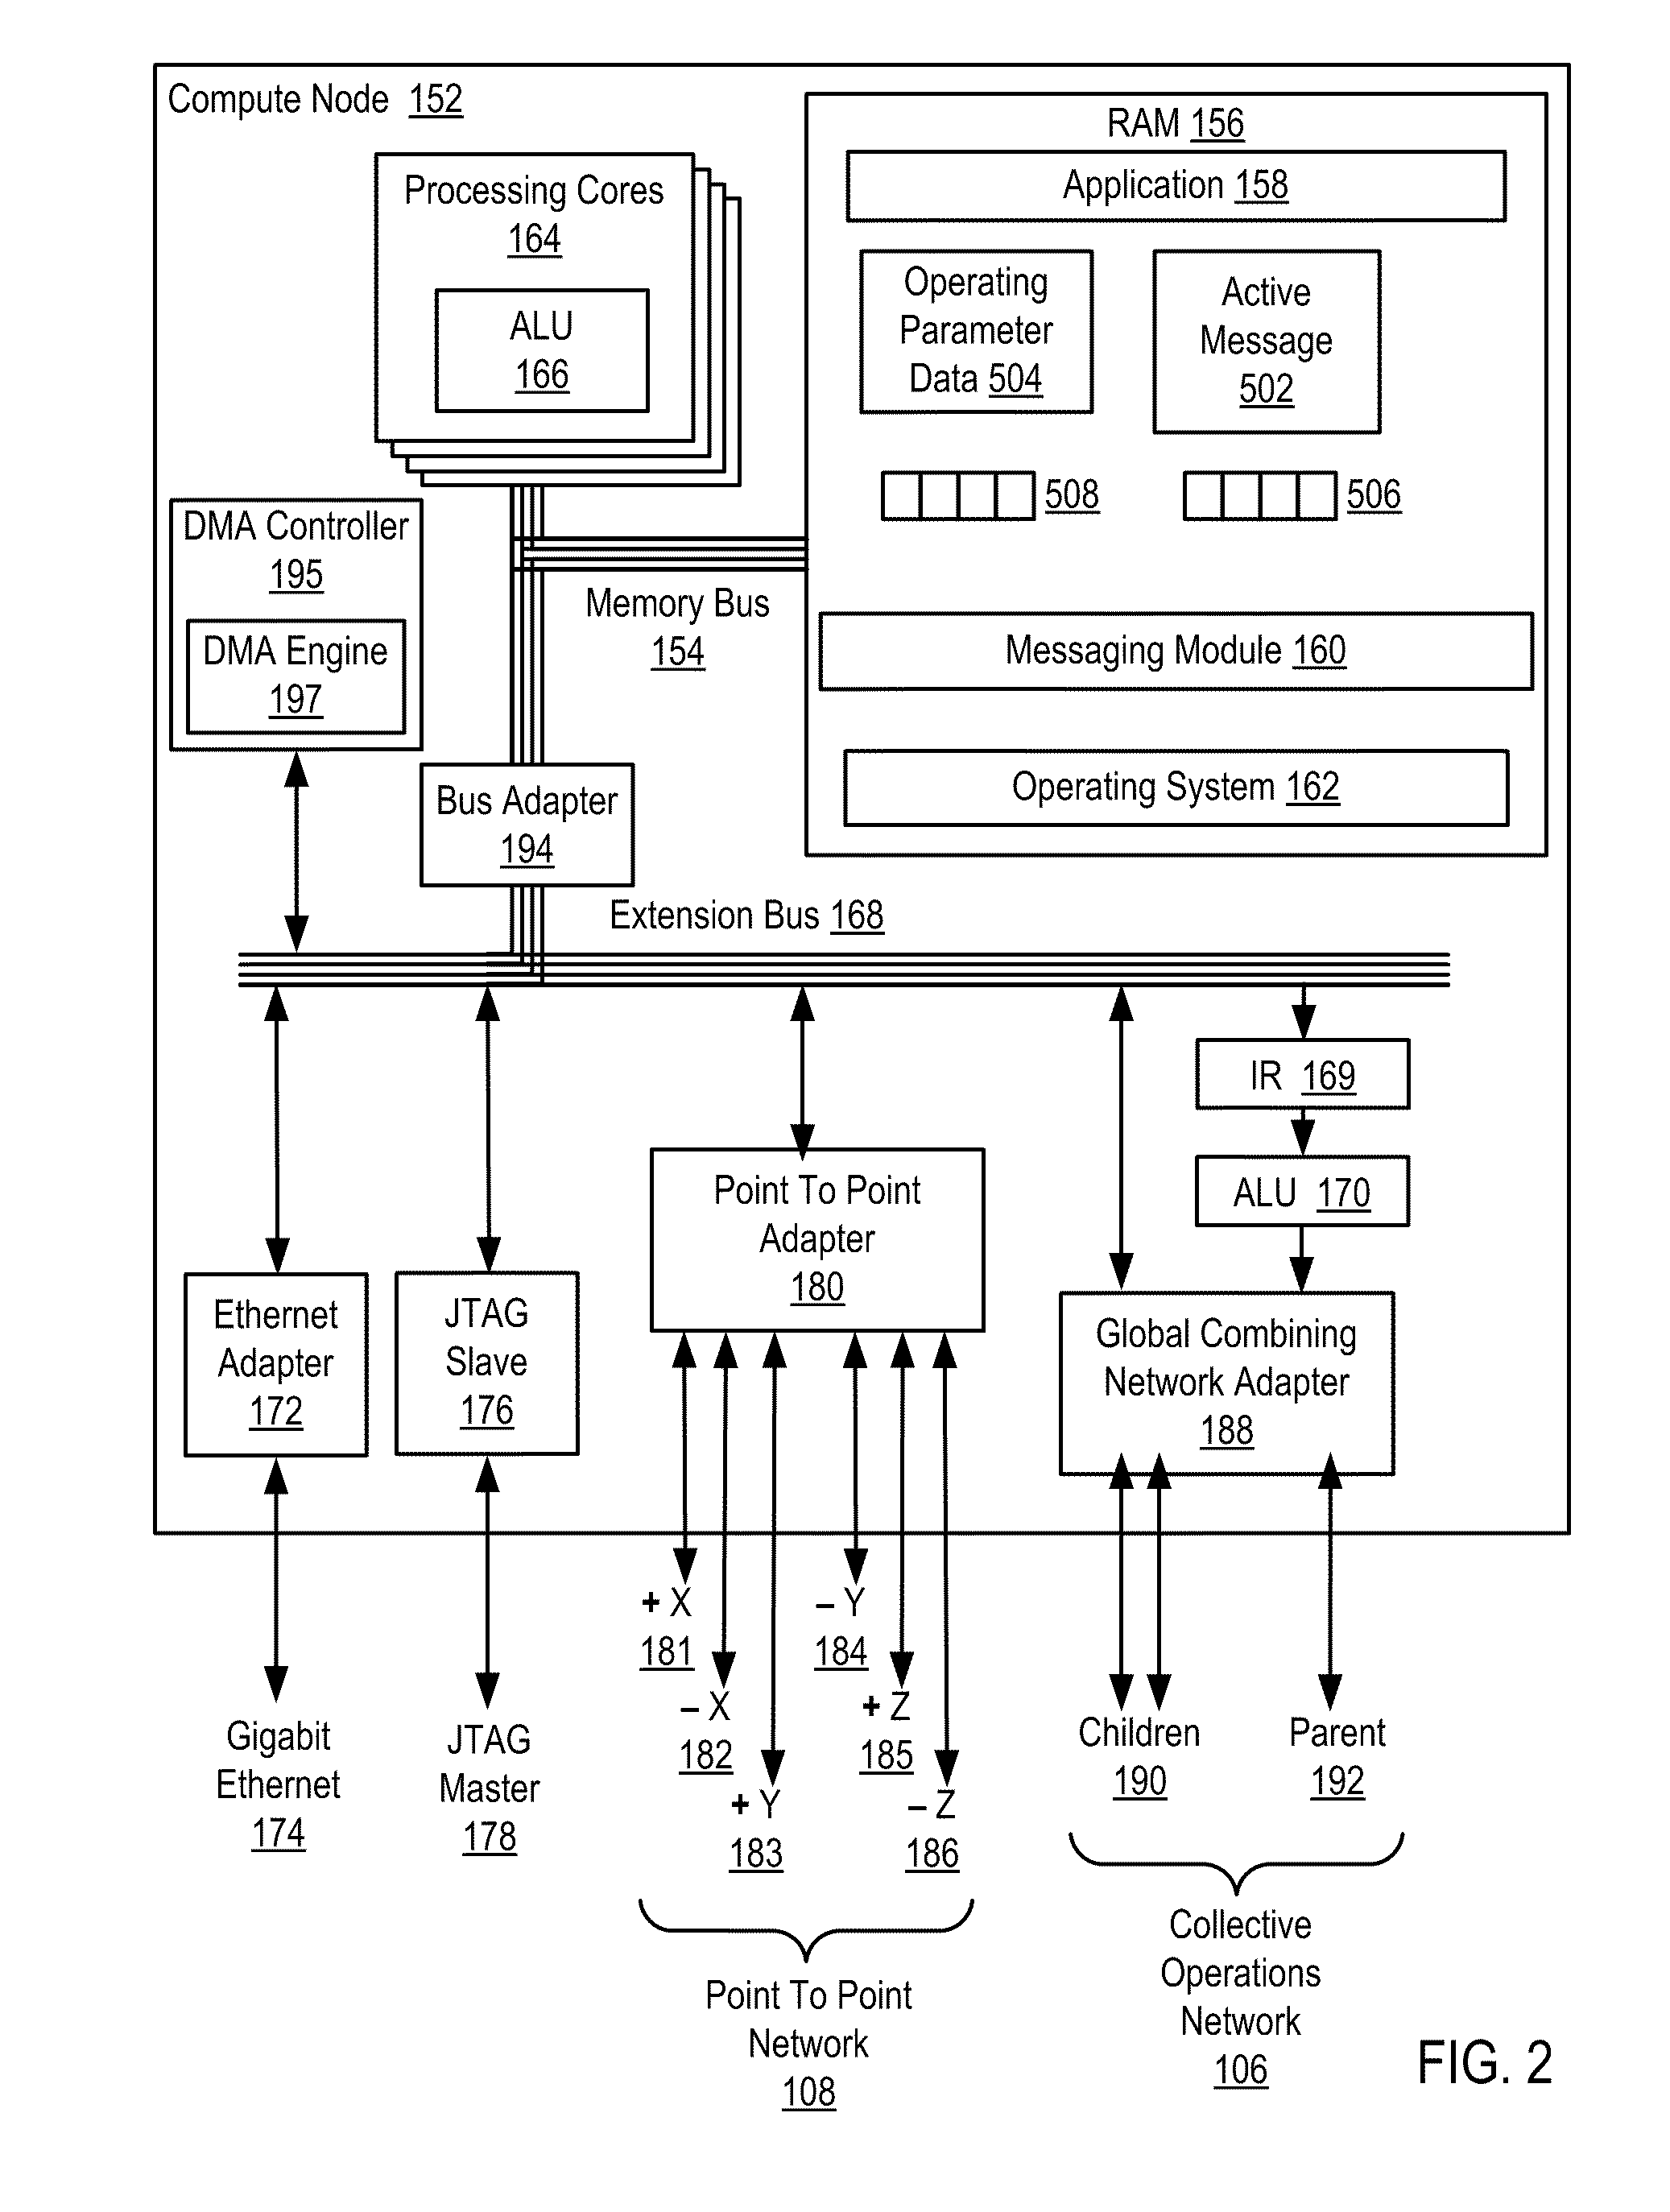 Monitoring Operating Parameters In A Distributed Computing System With Active Messages